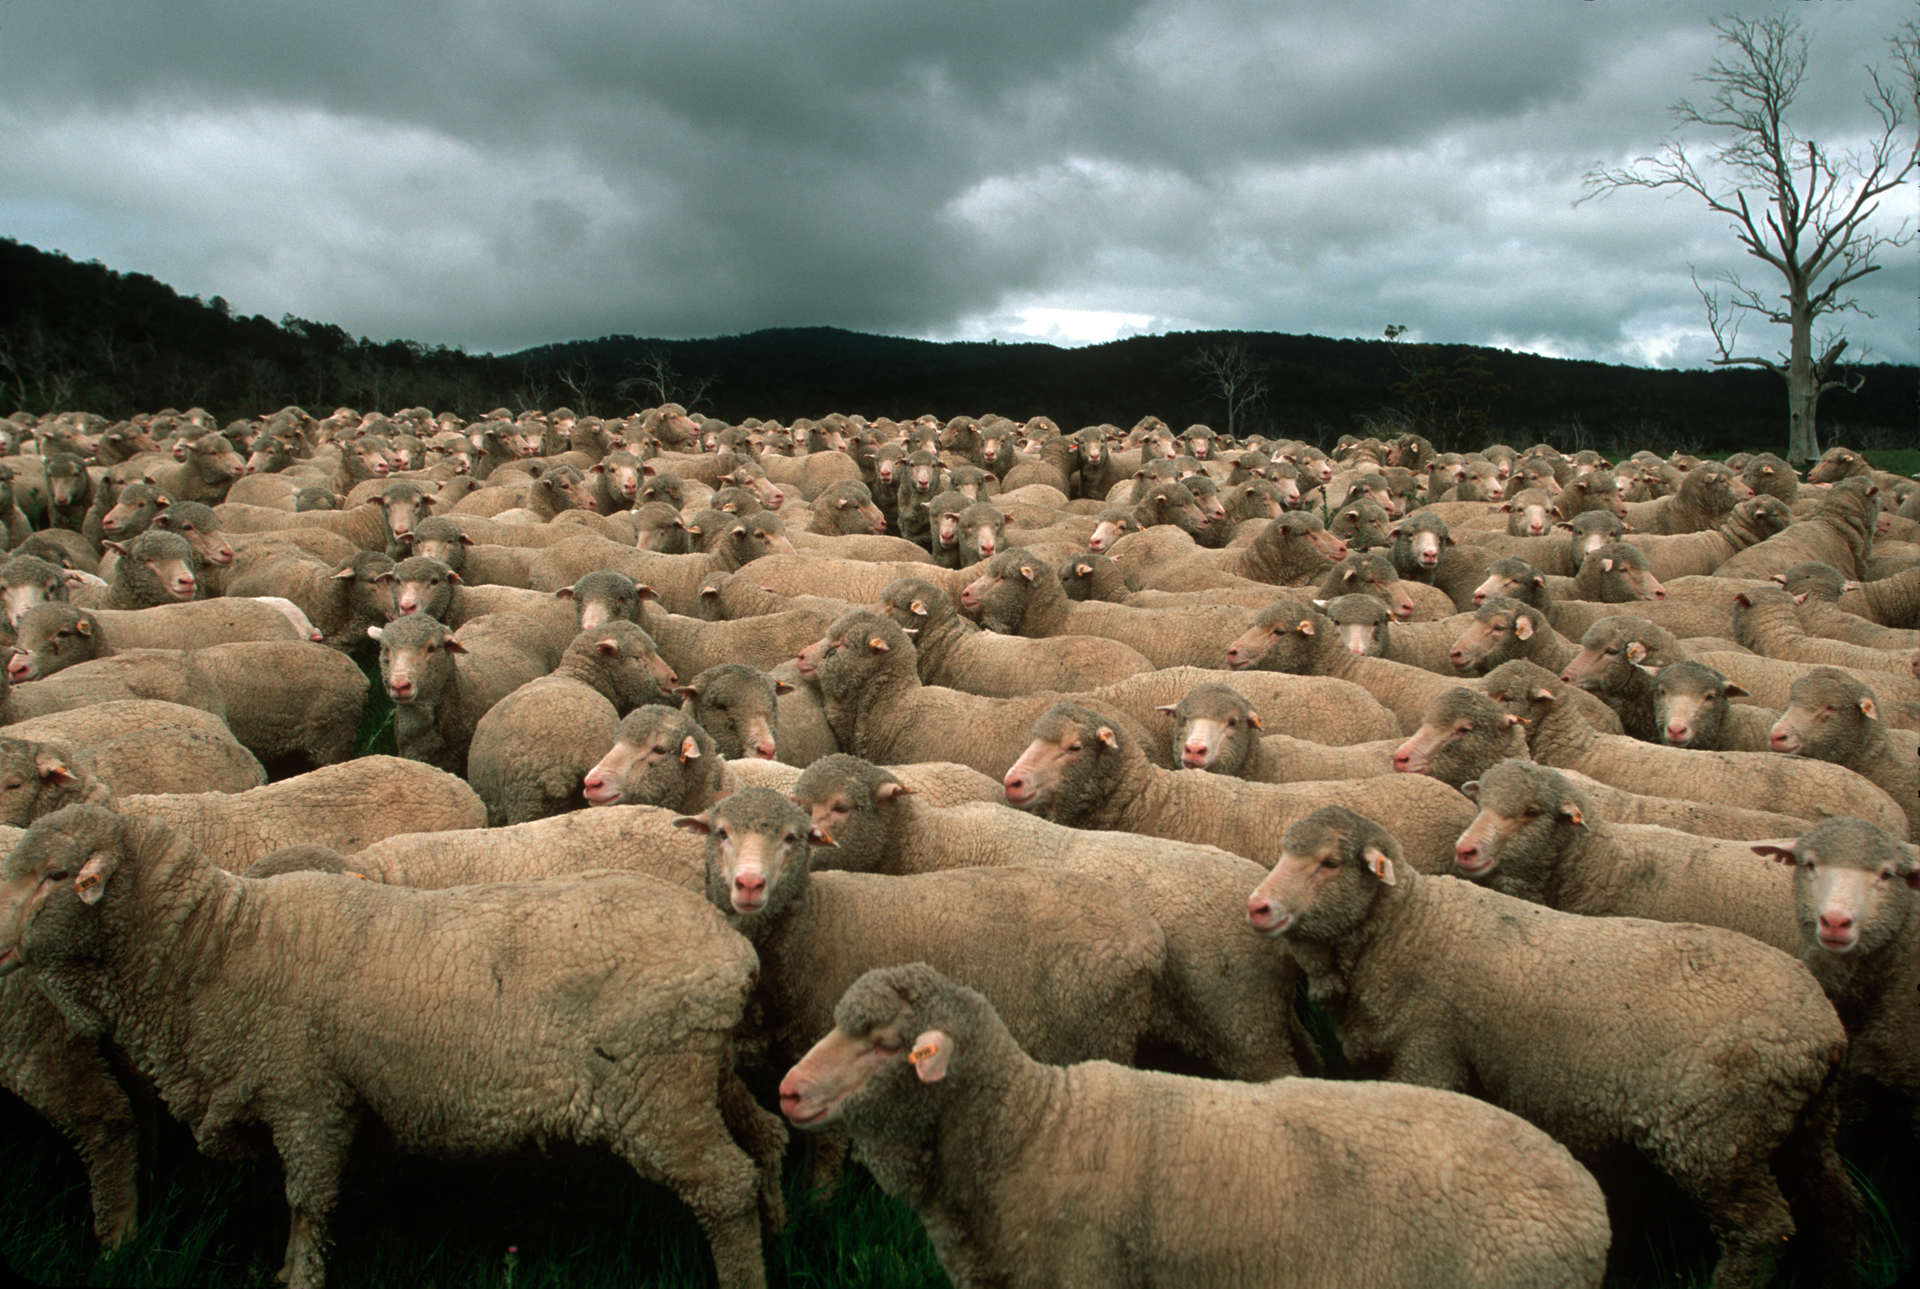  The Saxon sheep breed of the 'Trefuses Farm' produces some of the world's finest Merino wool.  Ross  